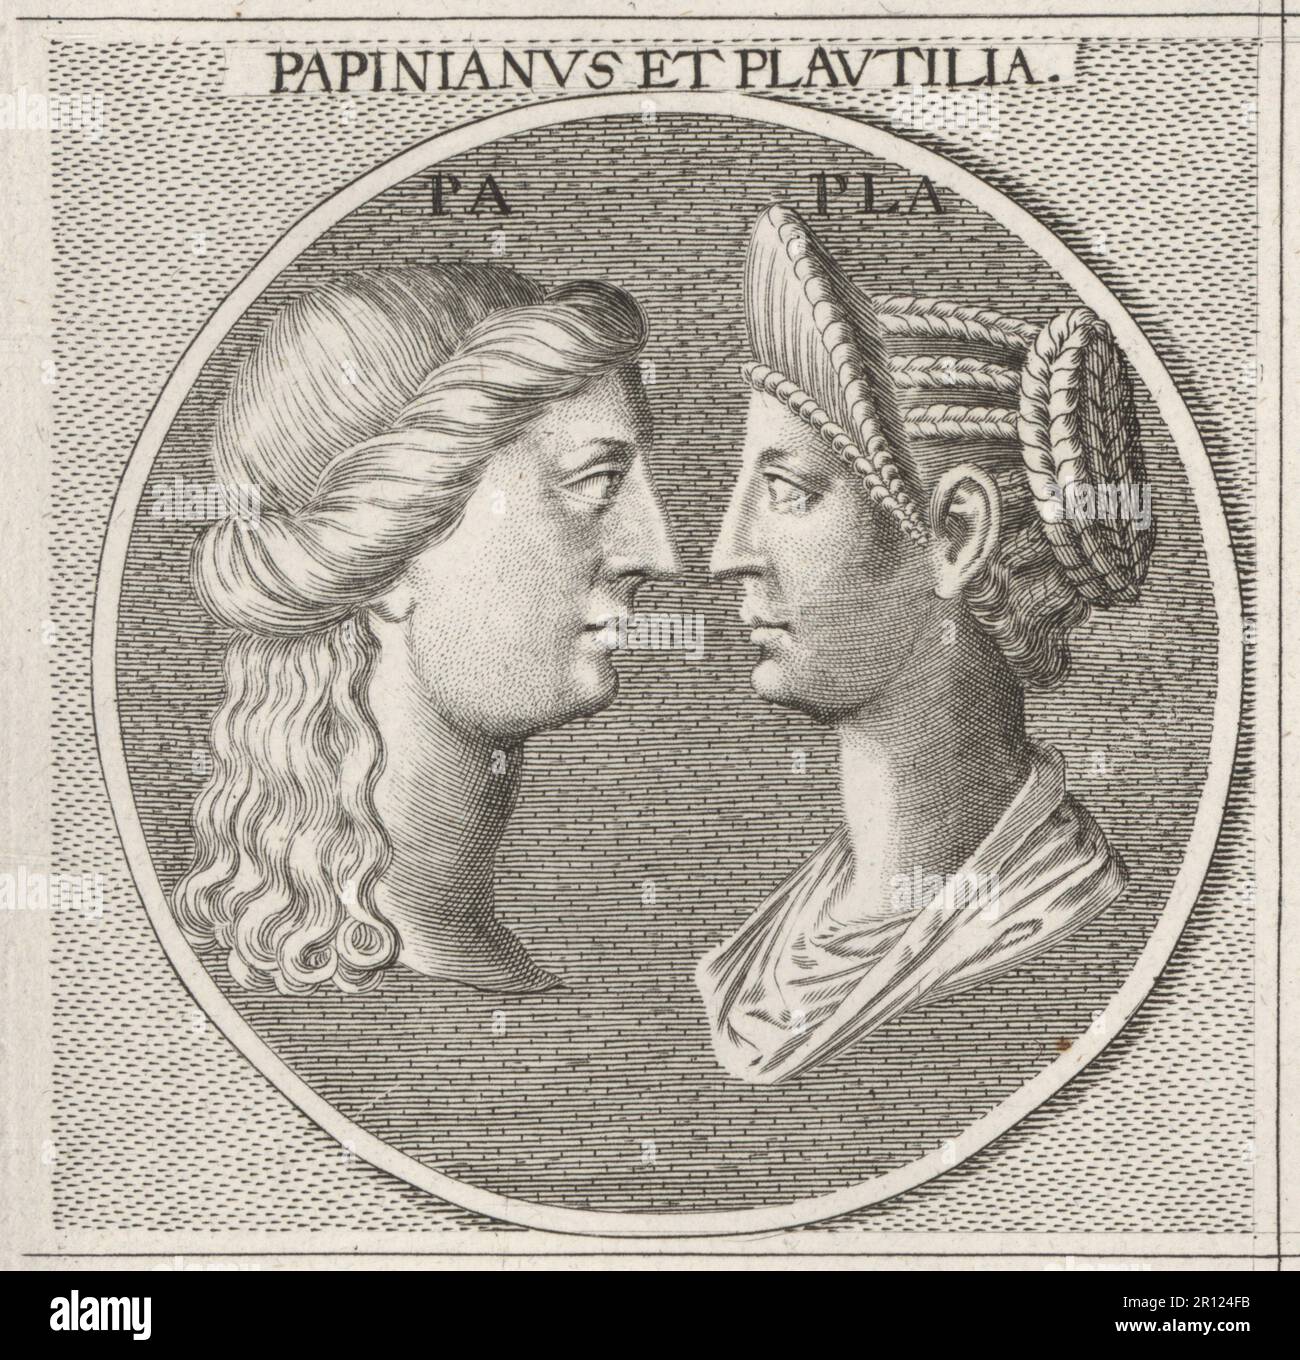 Roman jurist Papinian and Empress Publia Fulvia Plautilla (died 211), wife of Roman emperor Caracalla, exiled after the execution of her father Gaius Fulvius Plautianus. Papinianus et Plautilia. Copperplate engraving after an illustration by Joachim von Sandrart from his L’Academia Todesca, della Architectura, Scultura & Pittura, oder Teutsche Academie, der Edlen Bau- Bild- und Mahlerey-Kunste, German Academy of Architecture, Sculpture and Painting, Jacob von Sandrart, Nuremberg, 1675. Stock Photo